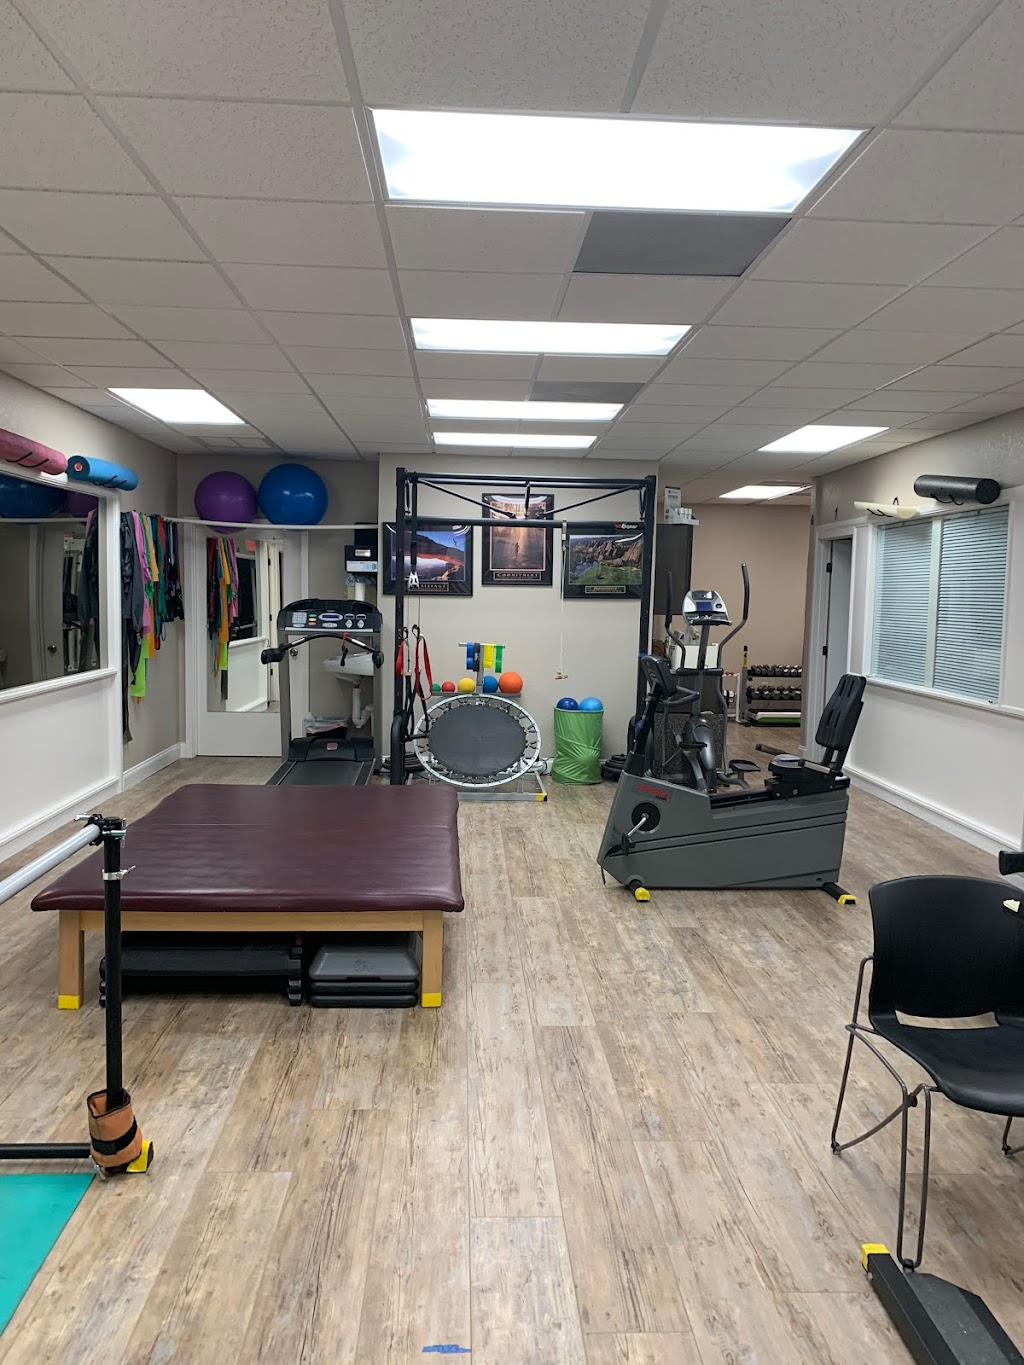 C.H.O.O.S.E. Physical Therapy LLC | Photo 1 of 8 | Address: 29605 US Hwy 19 N STE 150, Clearwater, FL 33761, USA | Phone: (727) 797-7600